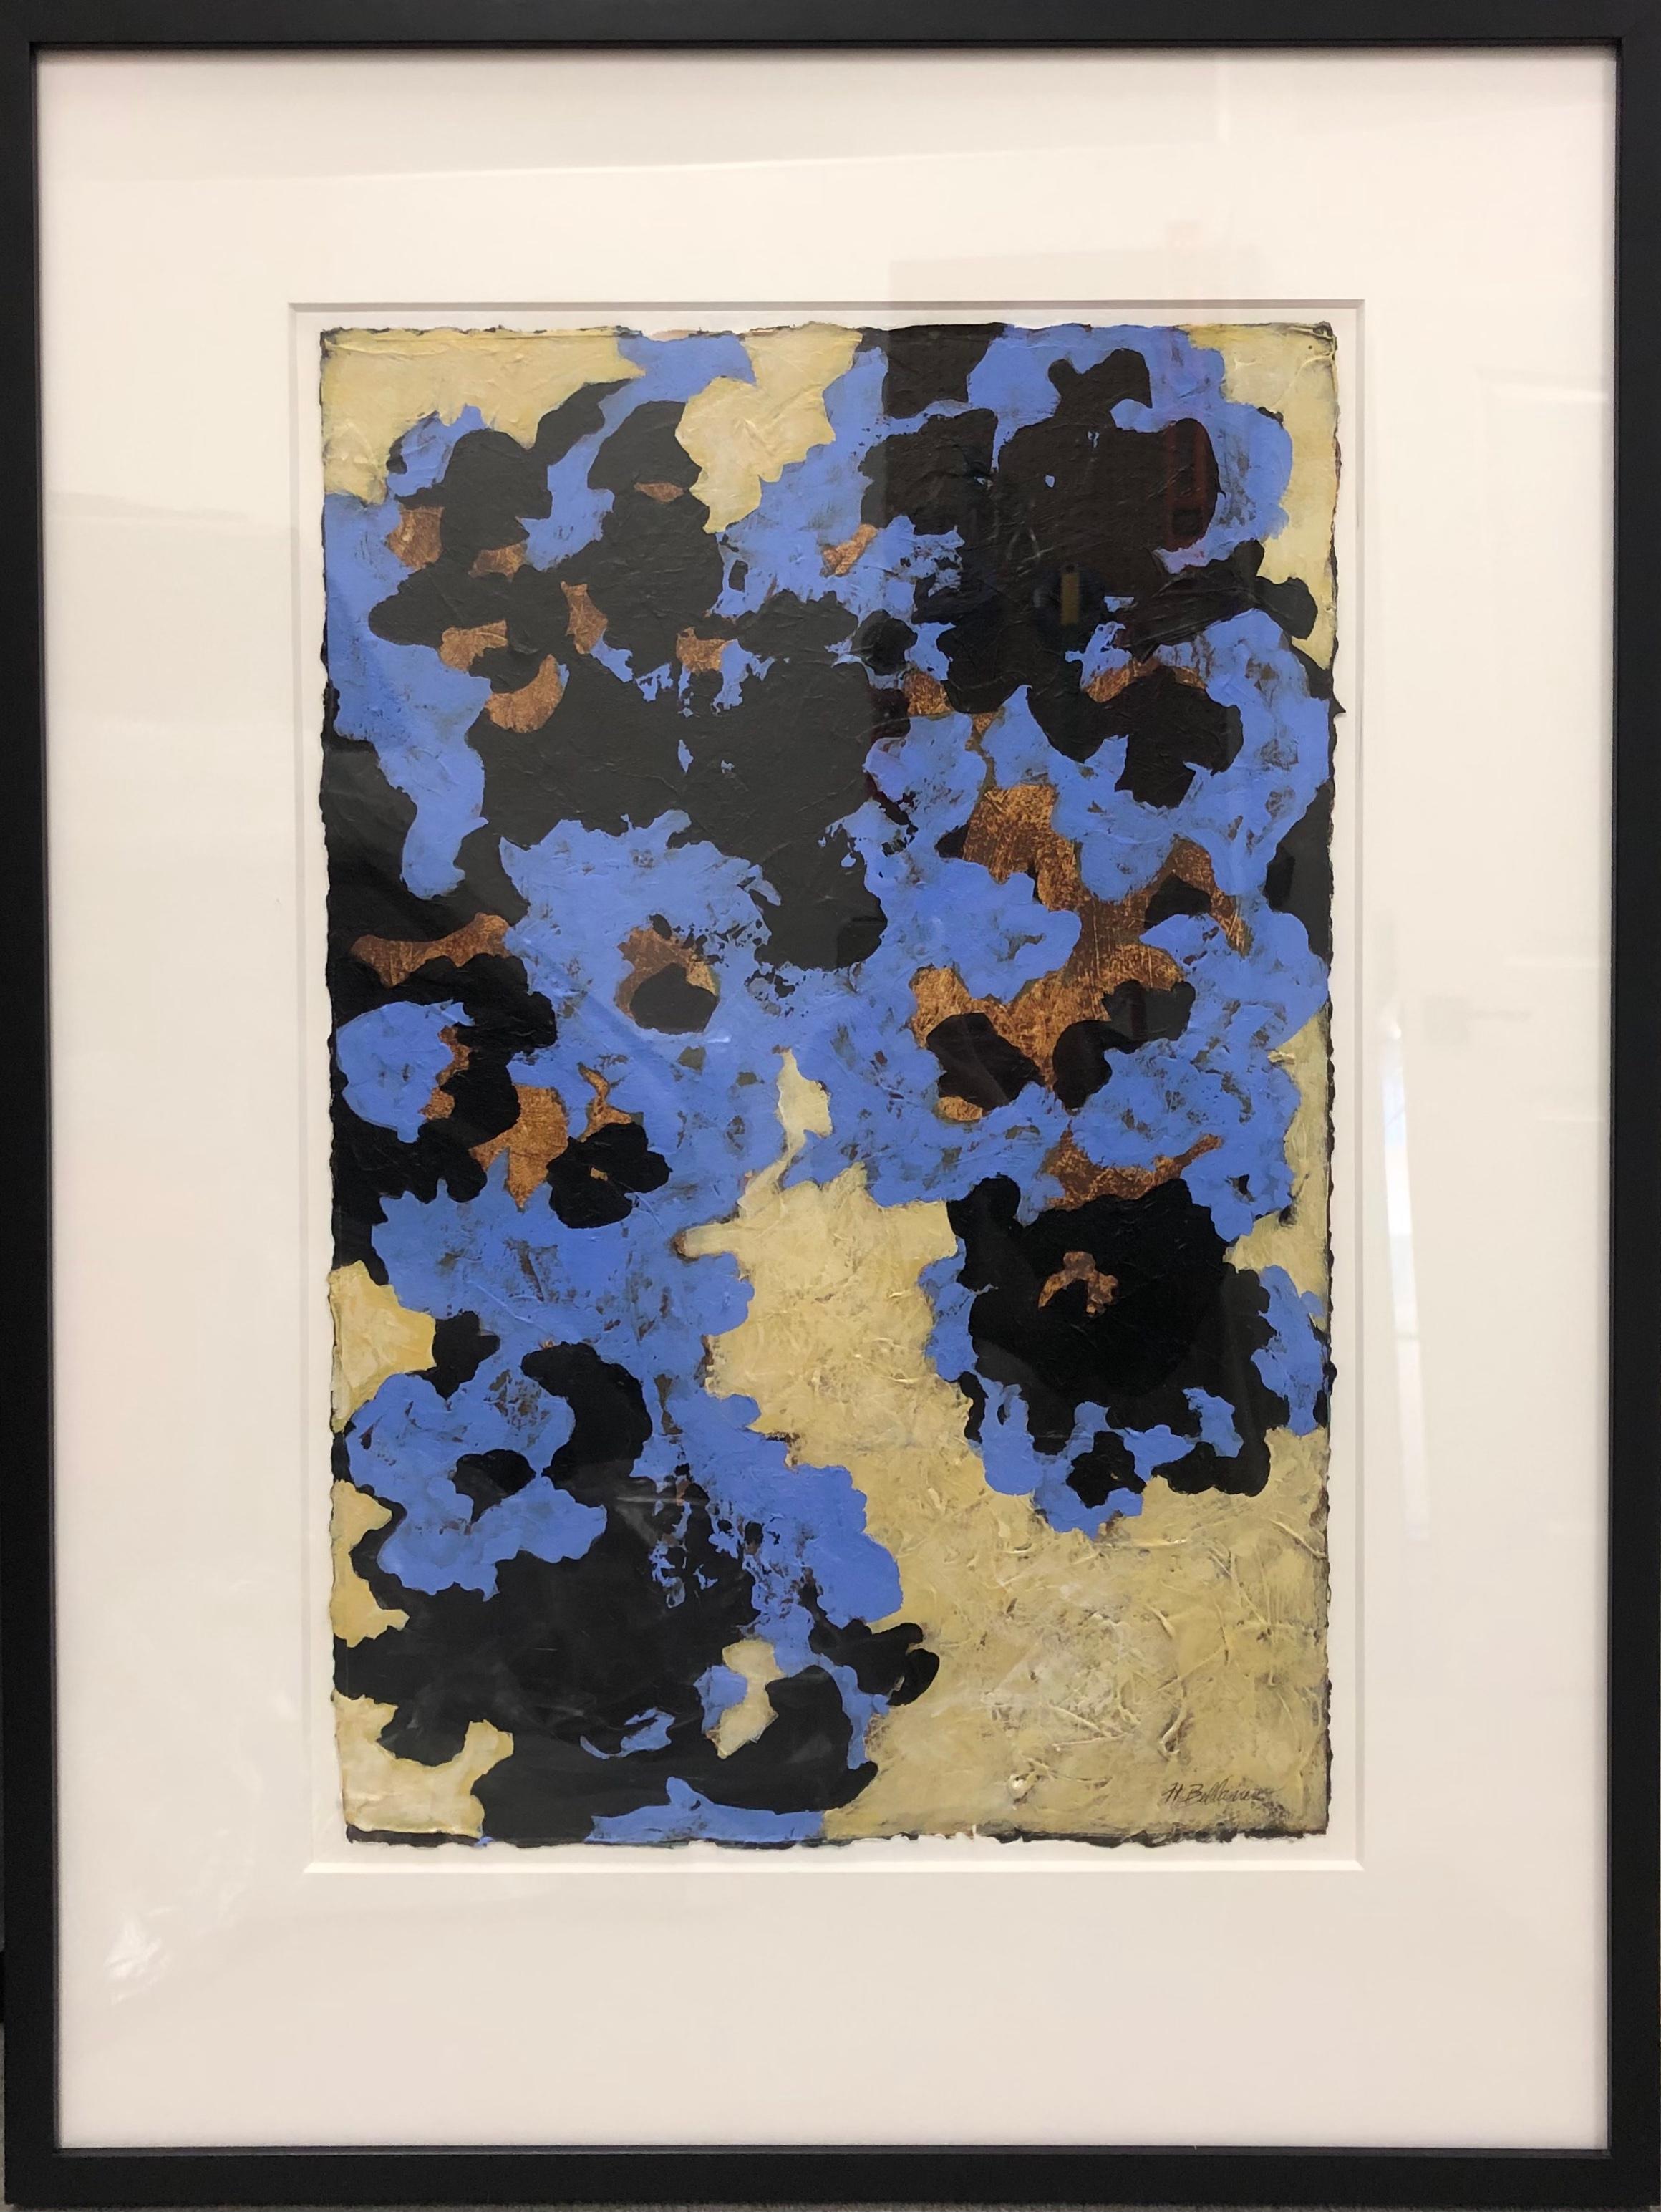 Blue Violet - Abstract Expressionist Mixed Media (Blue + Black + Sienna + Cream) - Contemporary Painting by Helen Bellaver